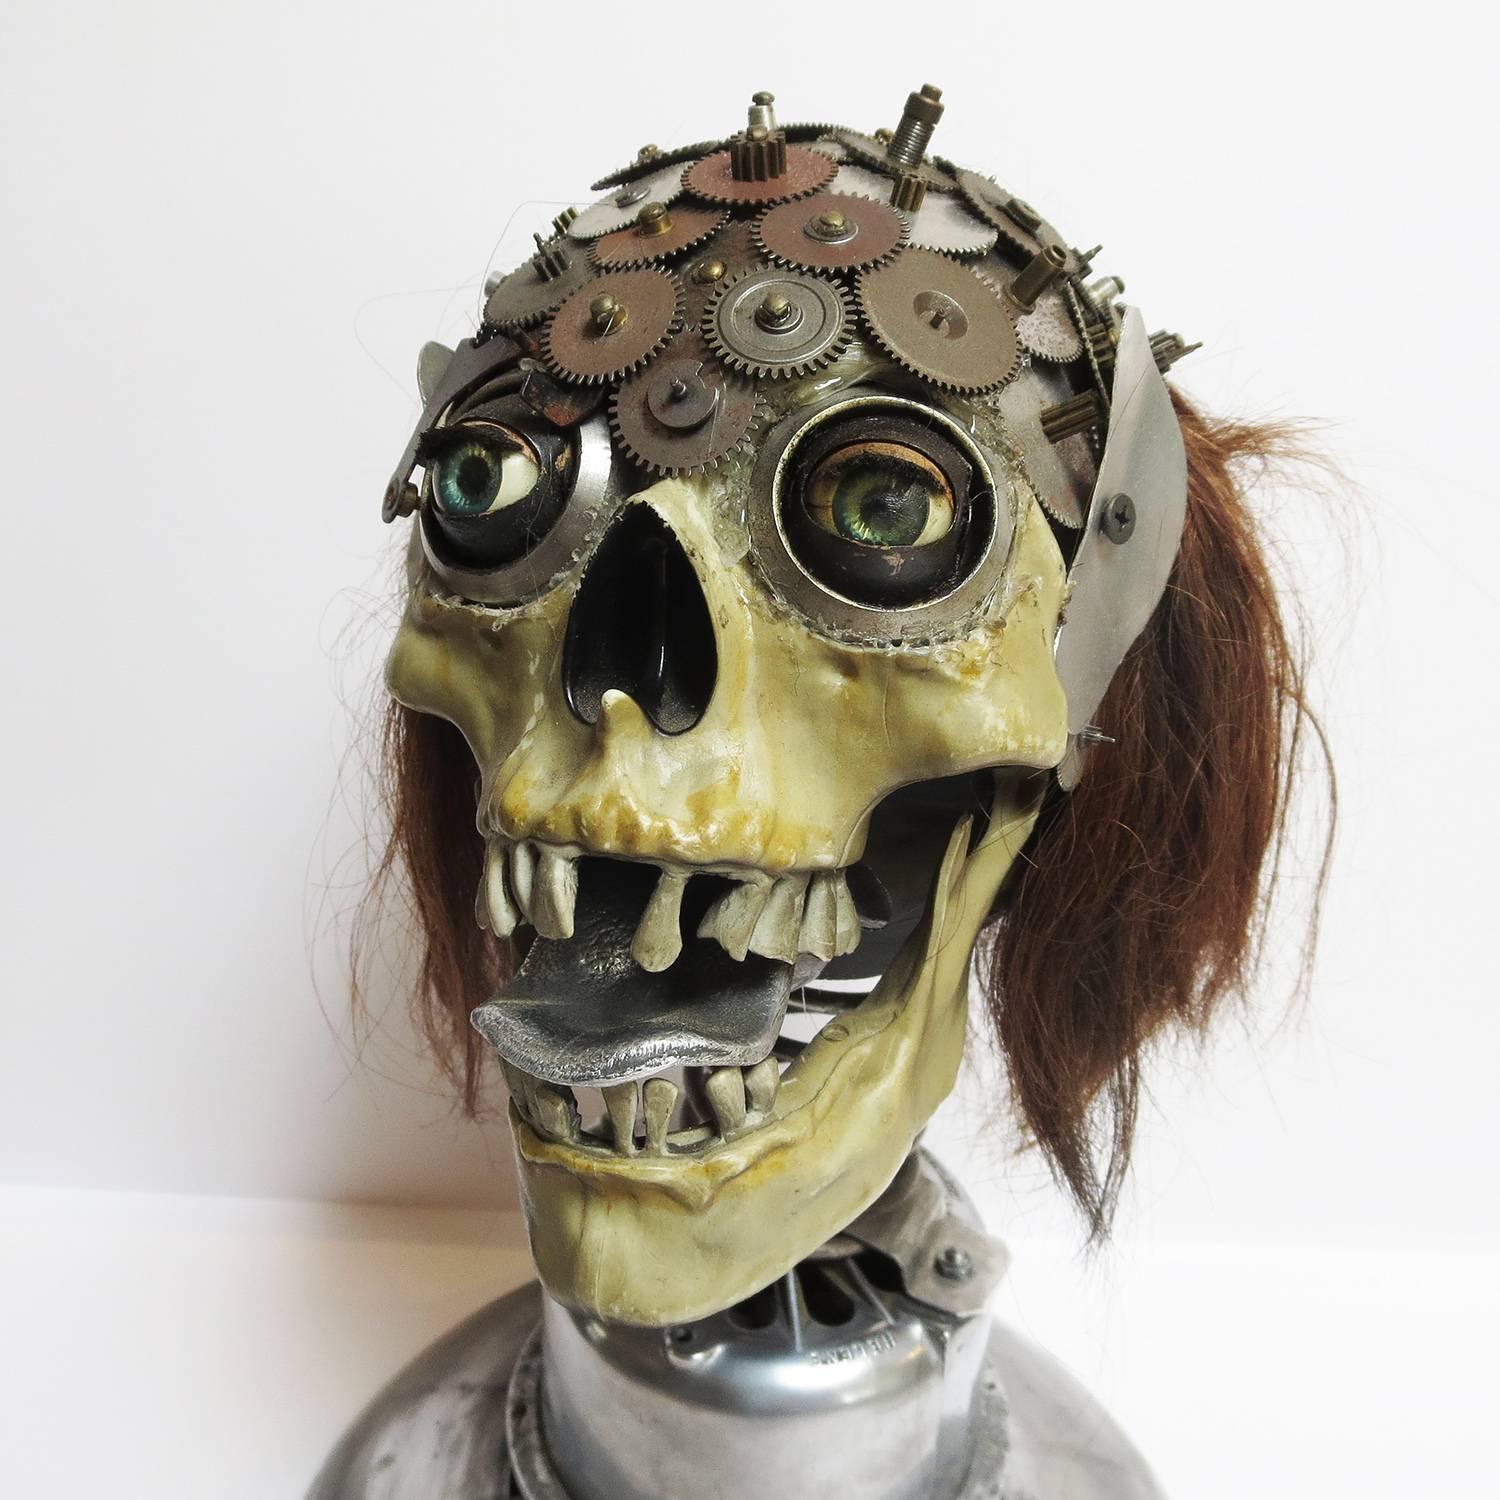 Los Angeles folk artist Baron Margo is known for his elaborate metal sculptures using 